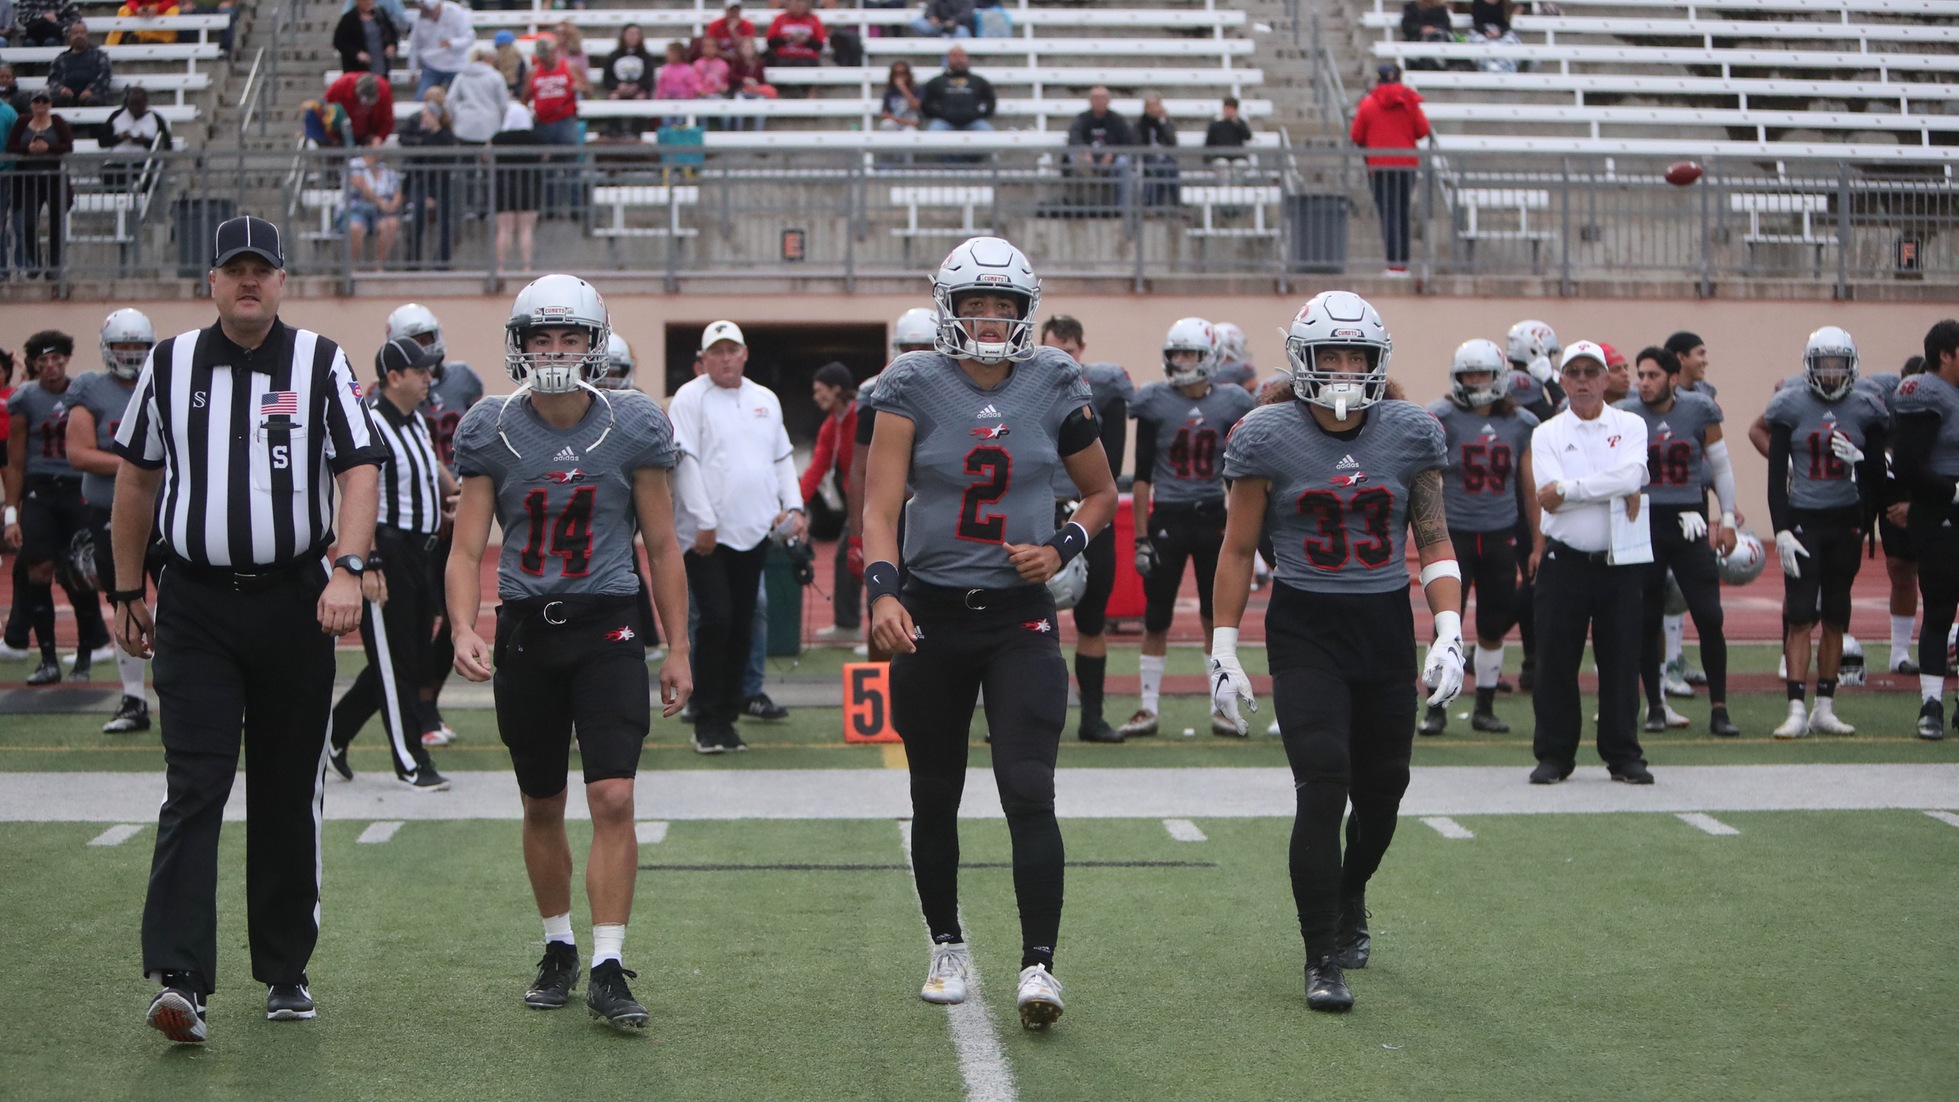 Last week's captains (Johnny Armentrout, Rodney Thompson and Giovanni Herrera) walk out for the coin toss. Photo by Hugh Cox.